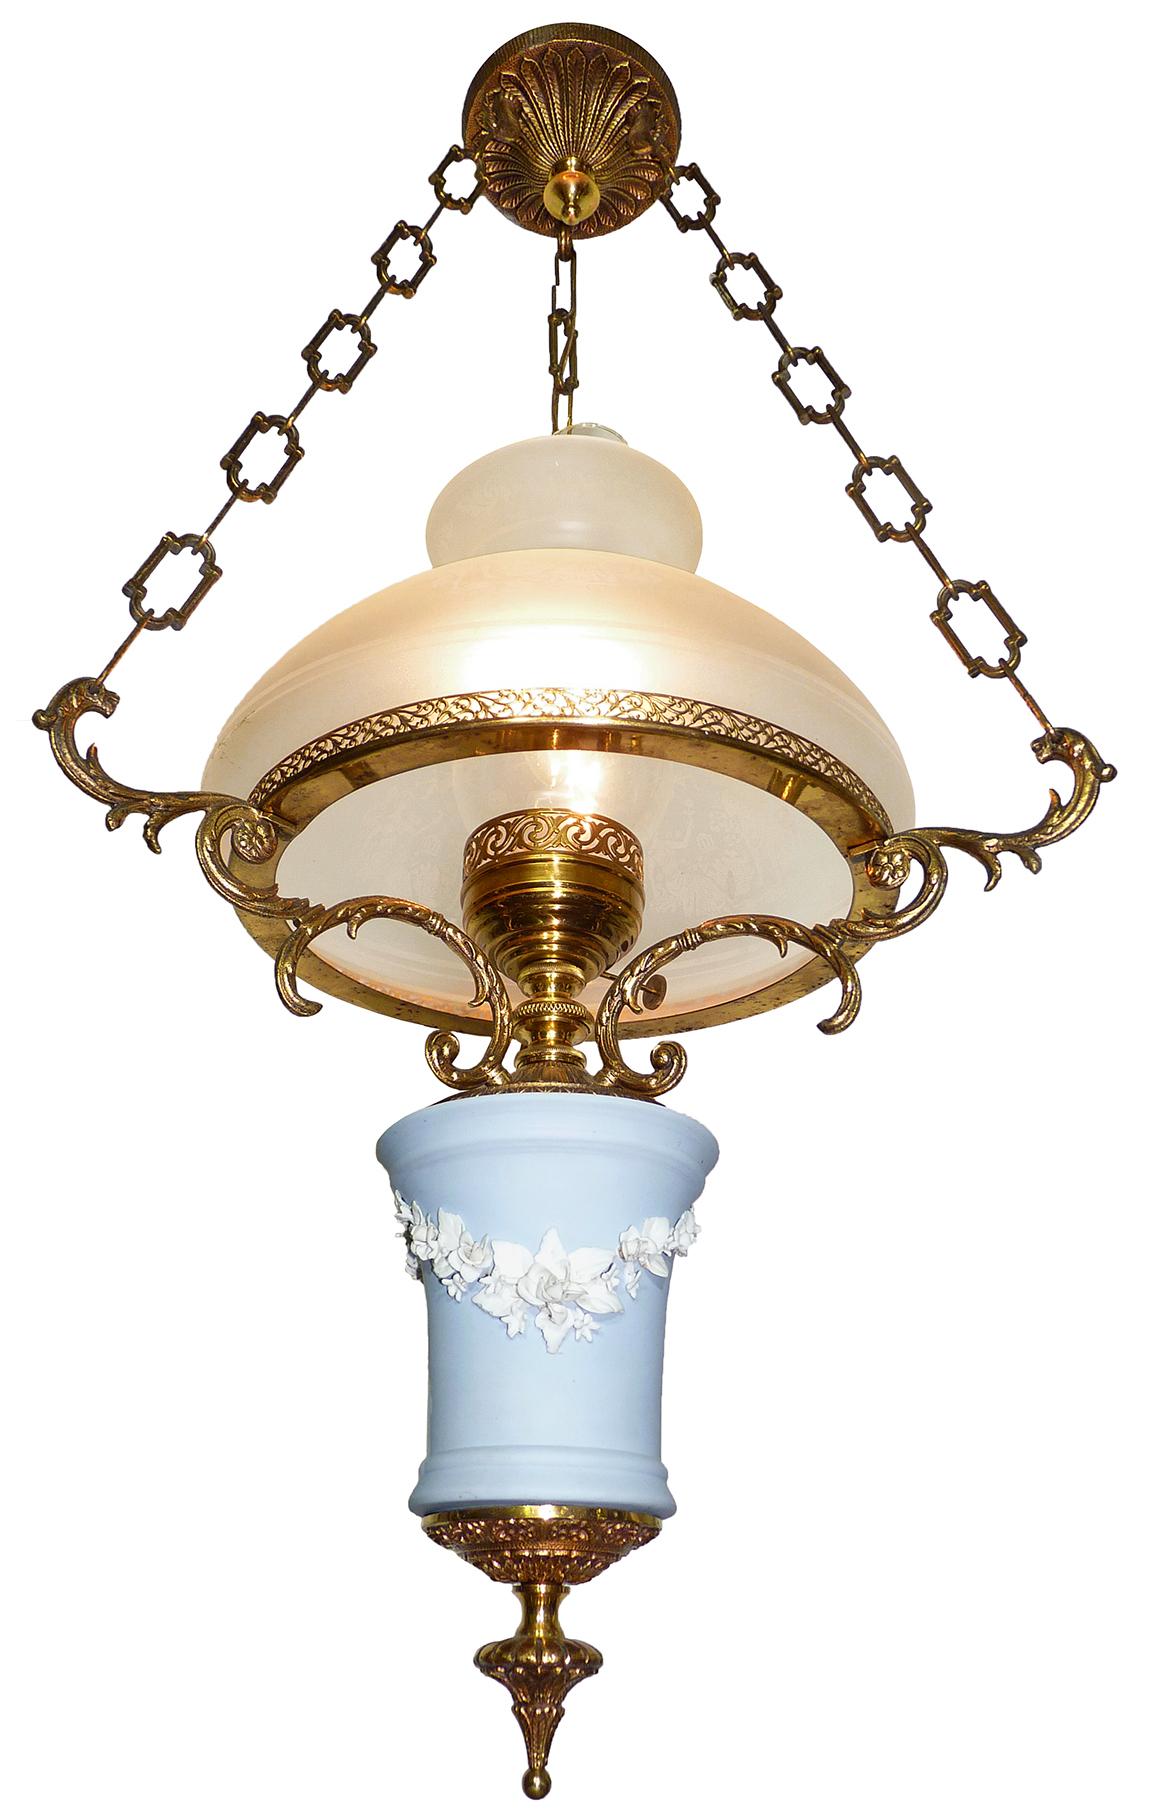 Adorable English Wedgwood porcelain chandelier gilt bronze Victorian library hanging oil lamp
with etched glass shade and sculpted roses applique porcelain.
Materials: Etched glass or porcelain or solid gilt bronze

Measures:
Diameter 19.8 in /